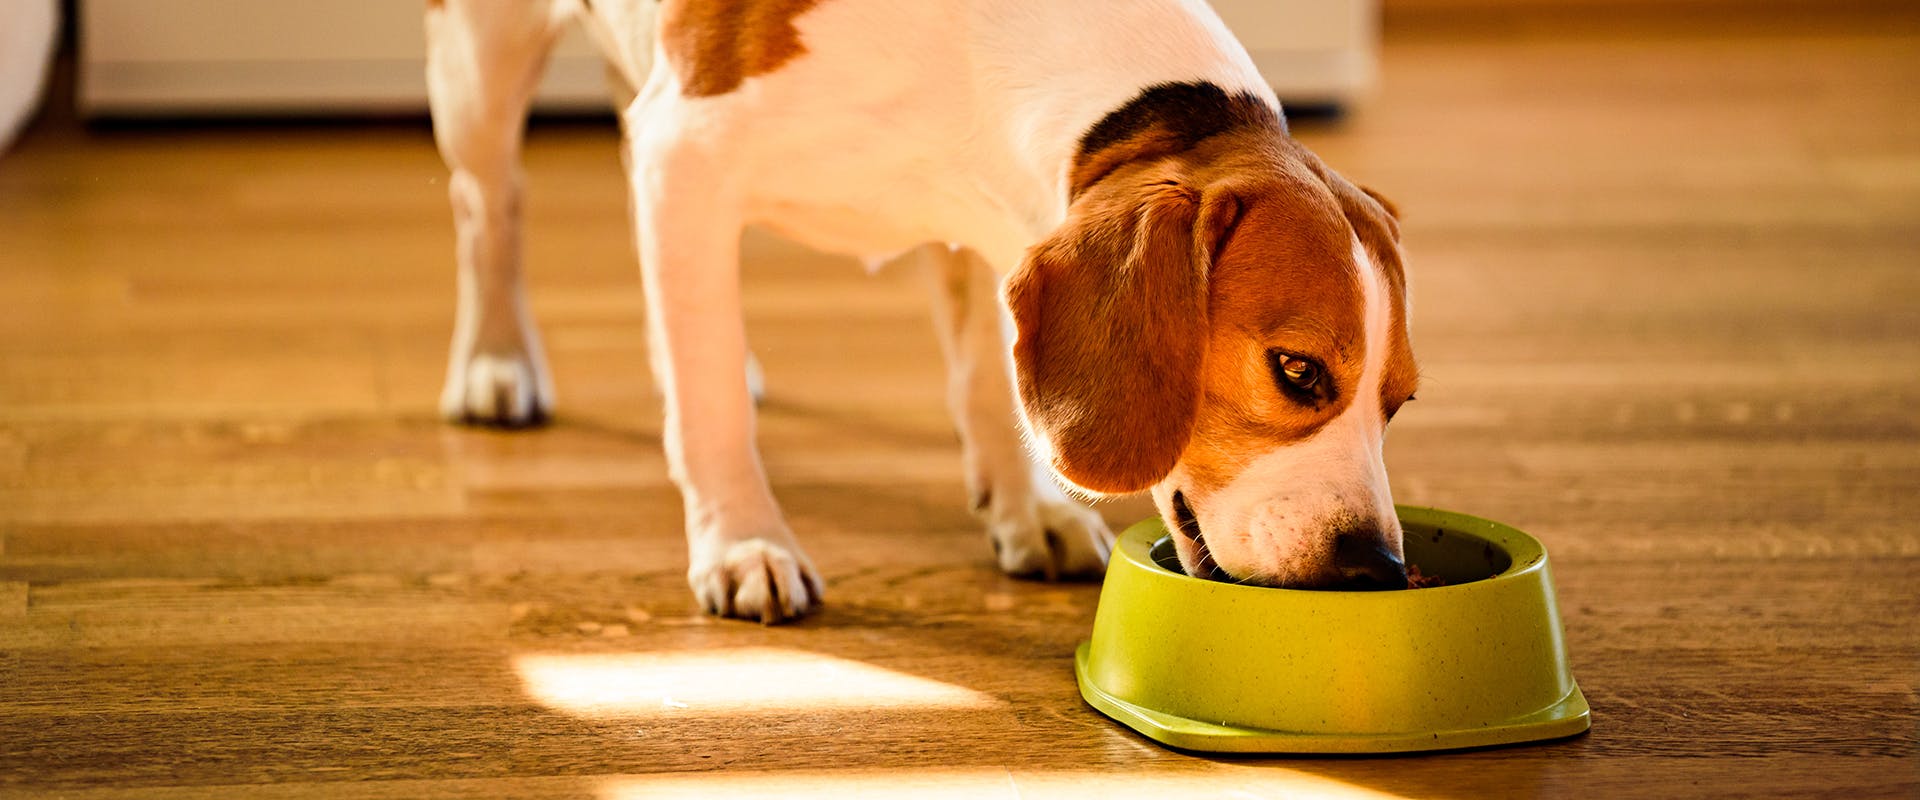 A dog eating from a green plastic dog bowl